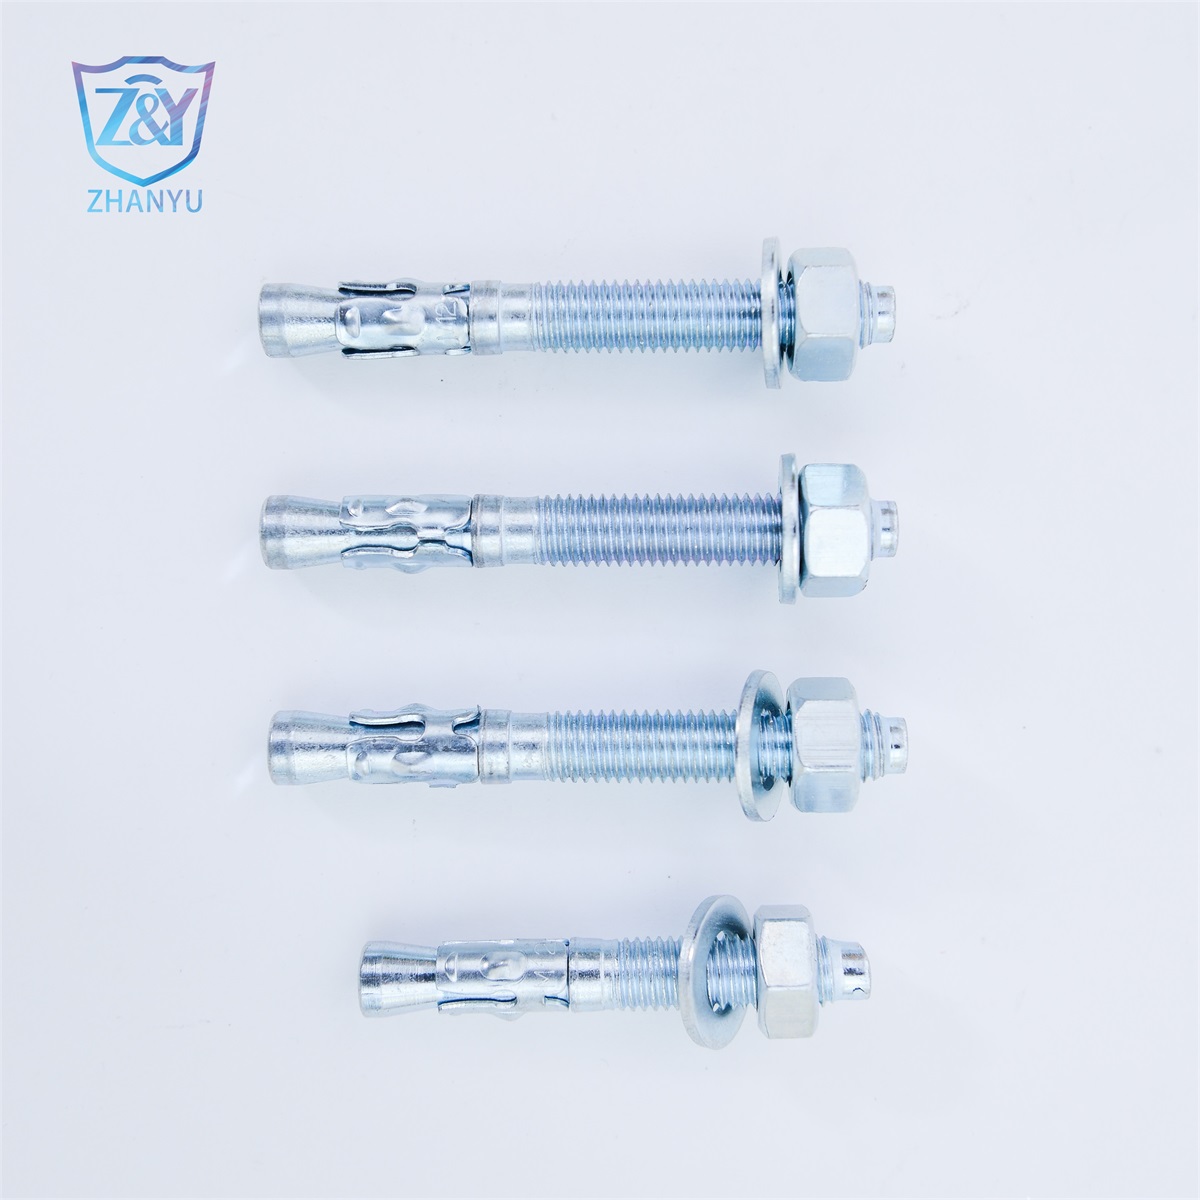 China wholesale Hex Head Anchor Bolt Suppliers –  wedge anchor GB /T 22795 Expansion Screw Through Bolt and Nuts Hex Concrete Wall Hardware Wedge Anchors Bolt – Zhanyu